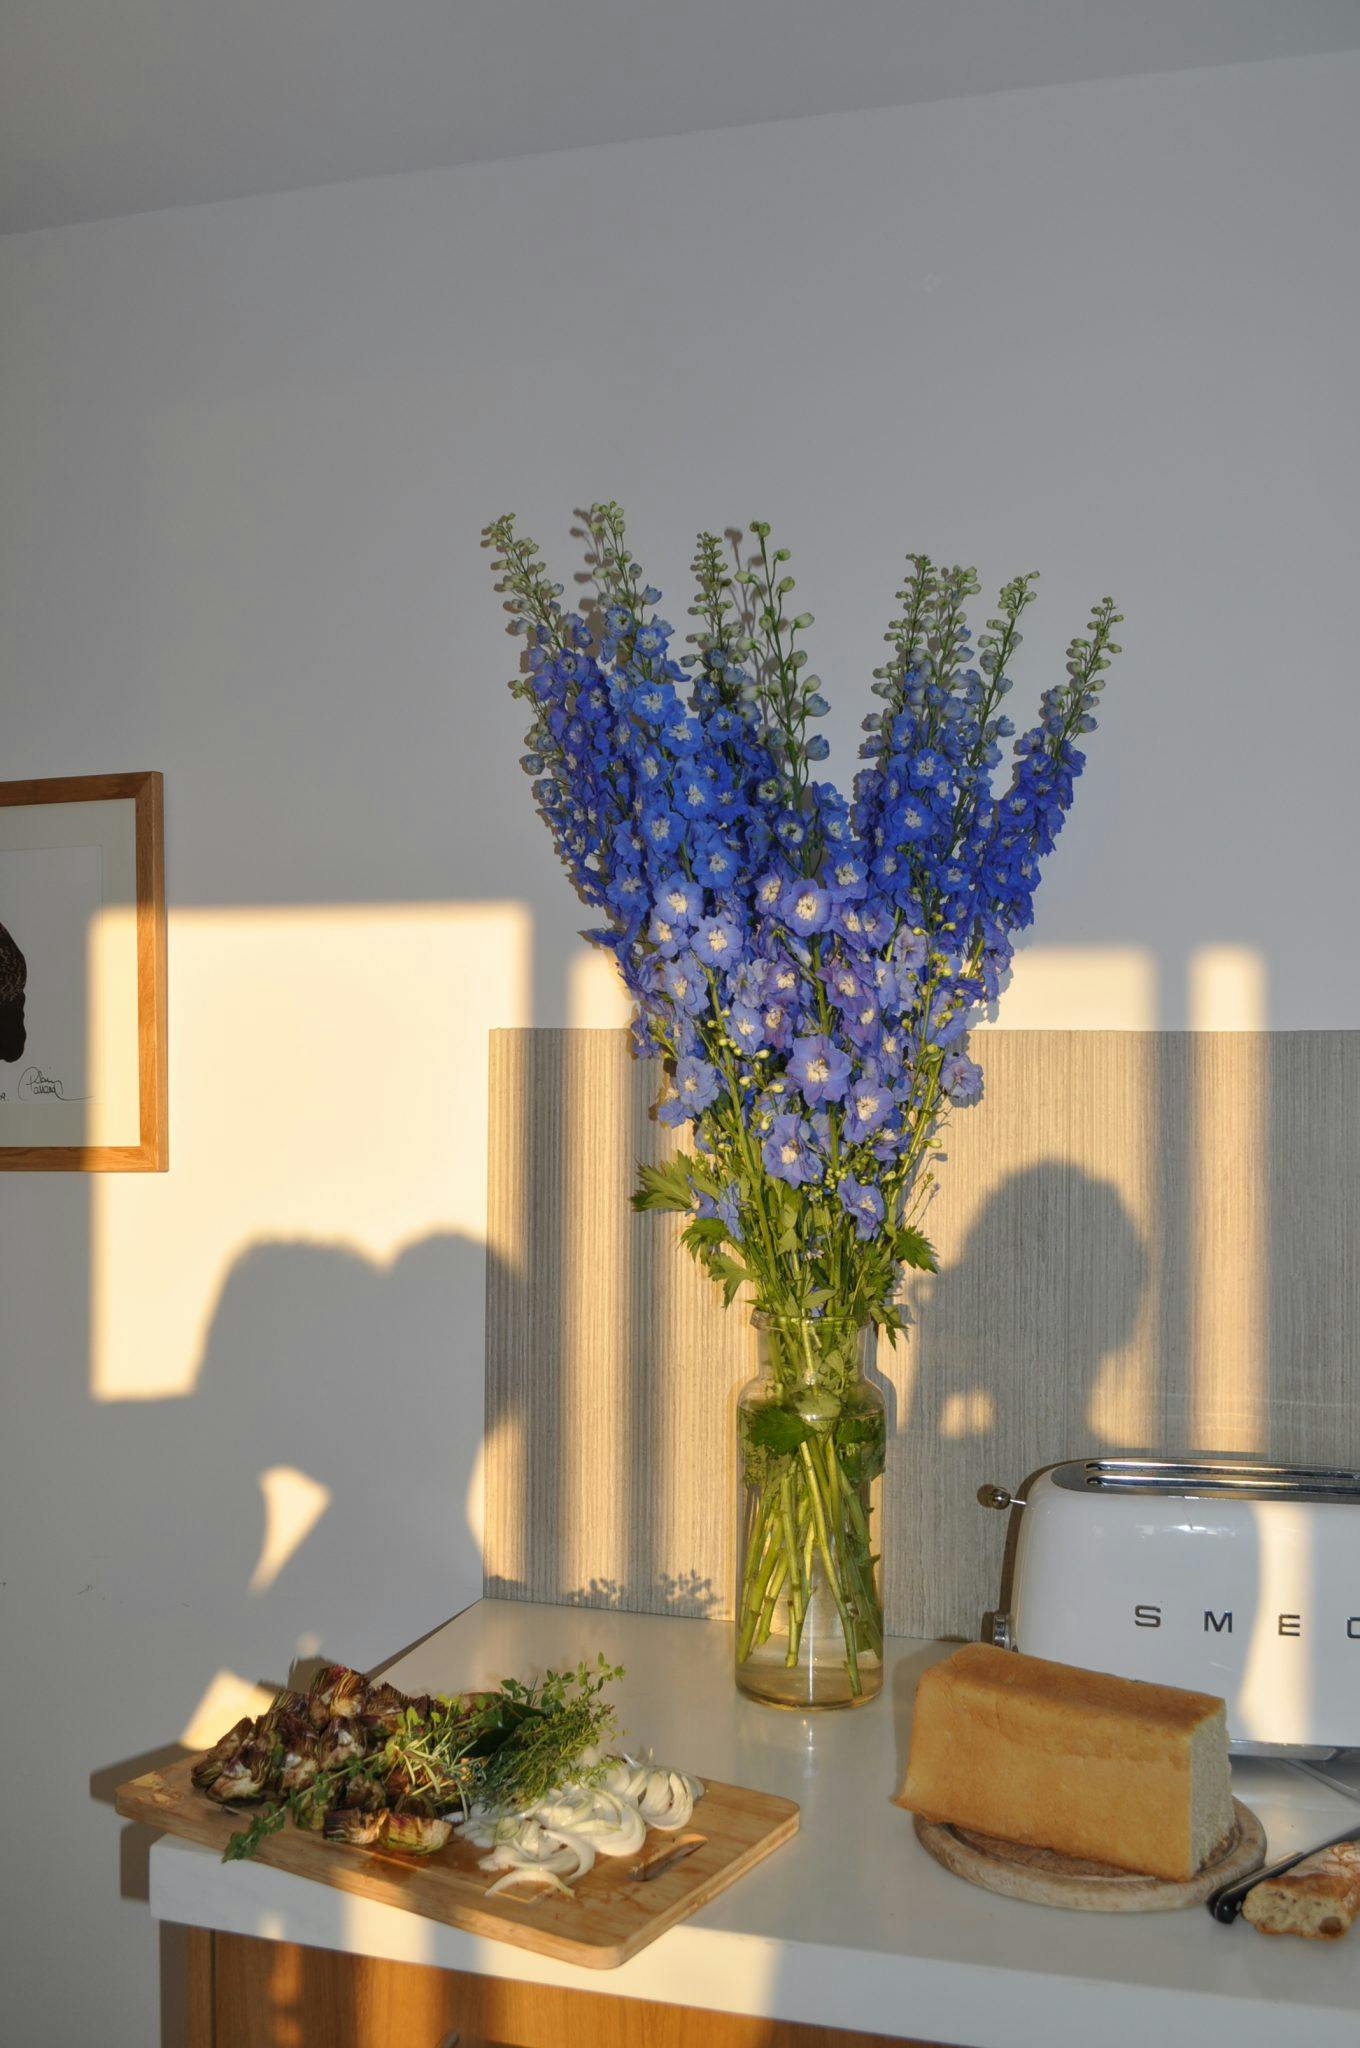 Kitchen counter, shadow of two people embracing, bouquet of flowers and Smeg appliances